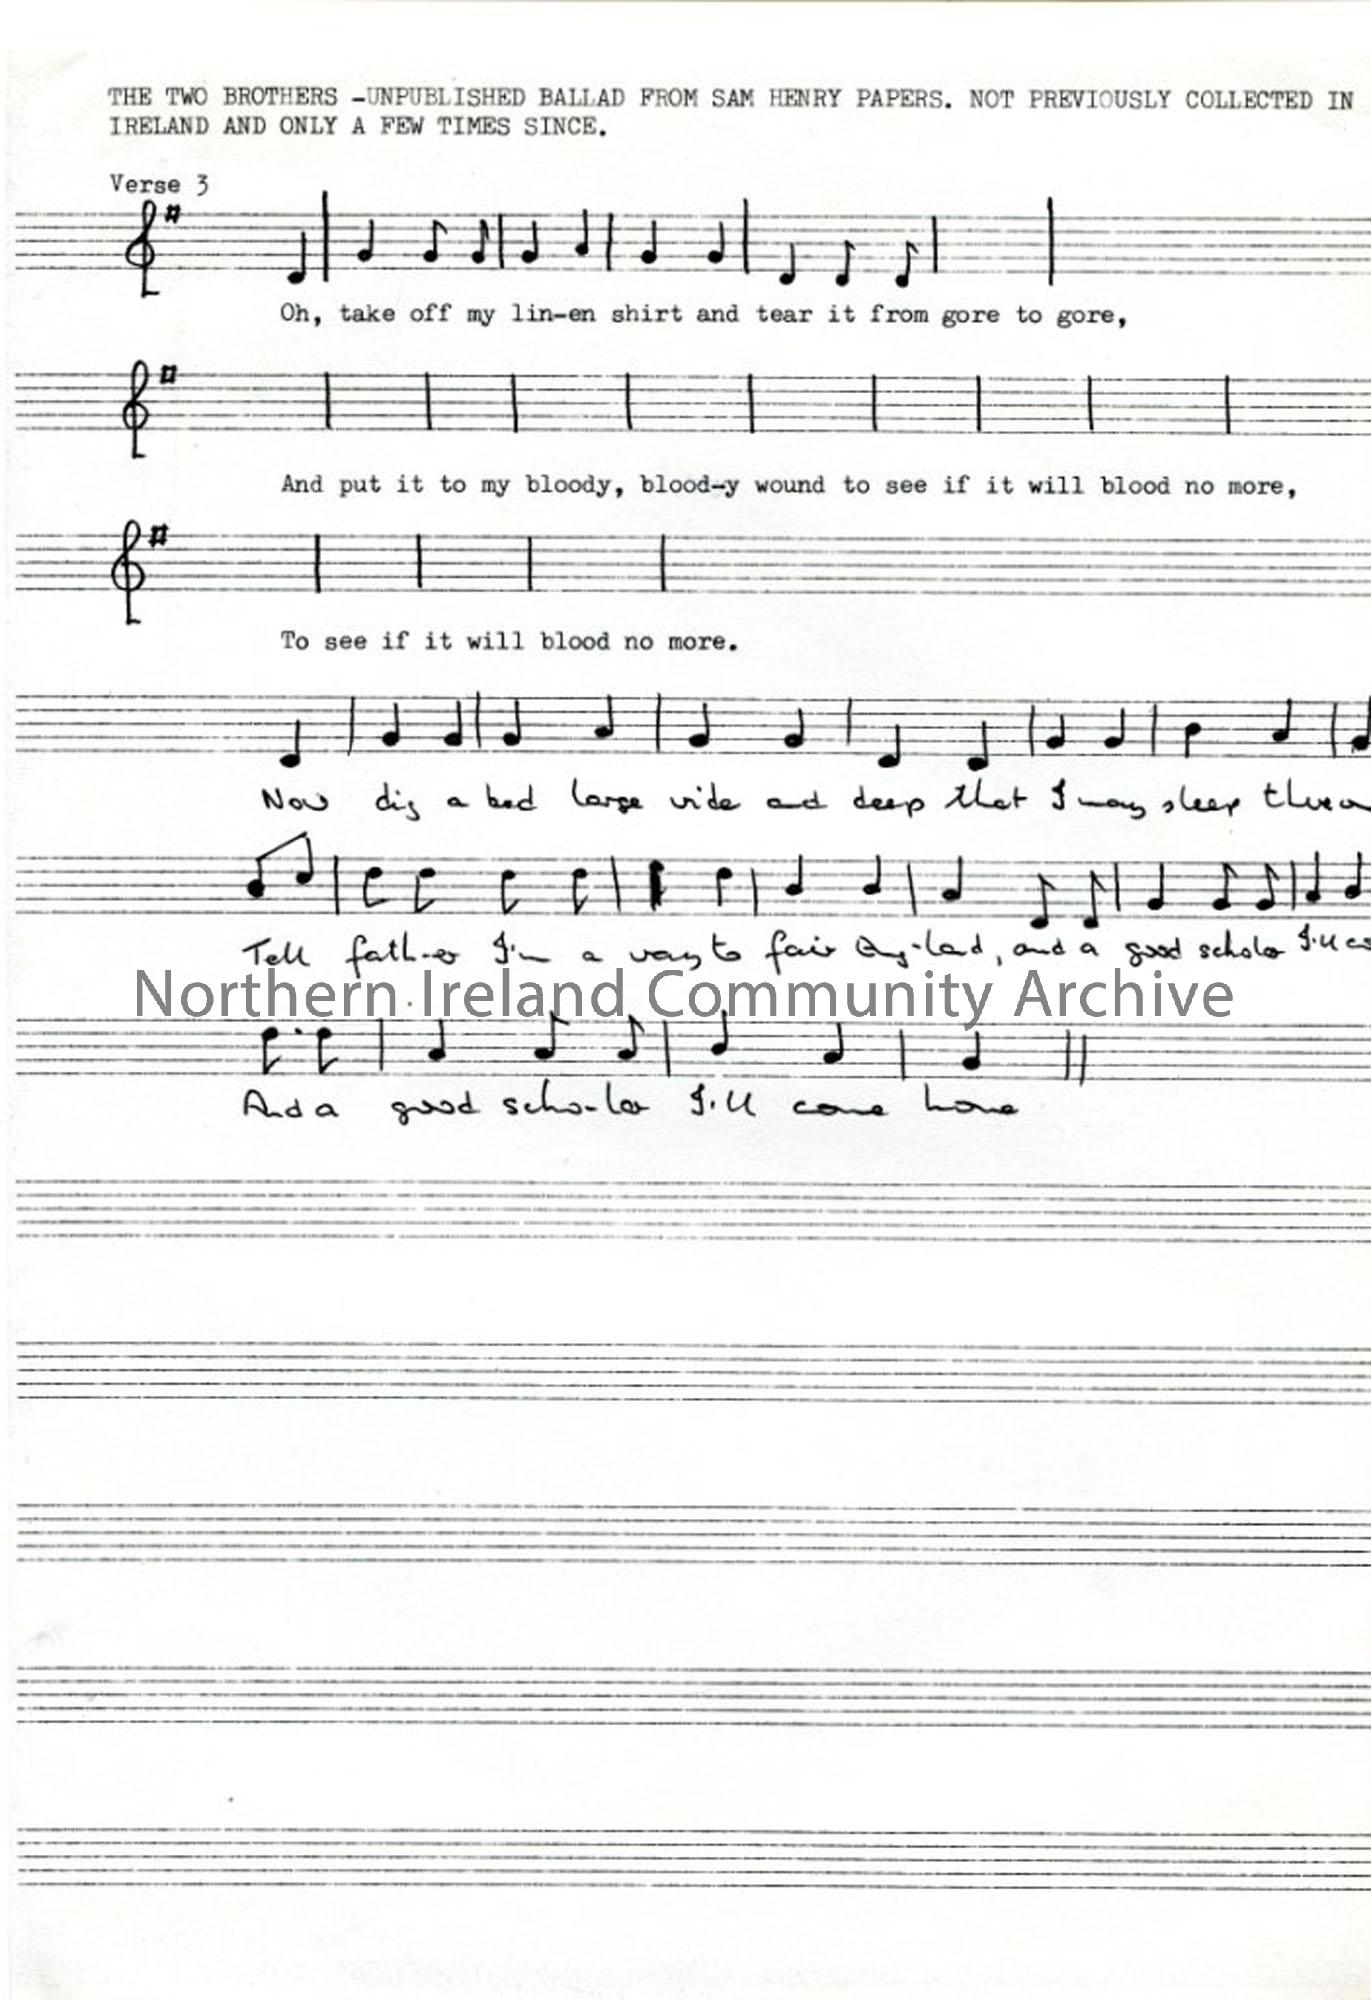 Two verses of ‘The Two Brothers’ set to music.